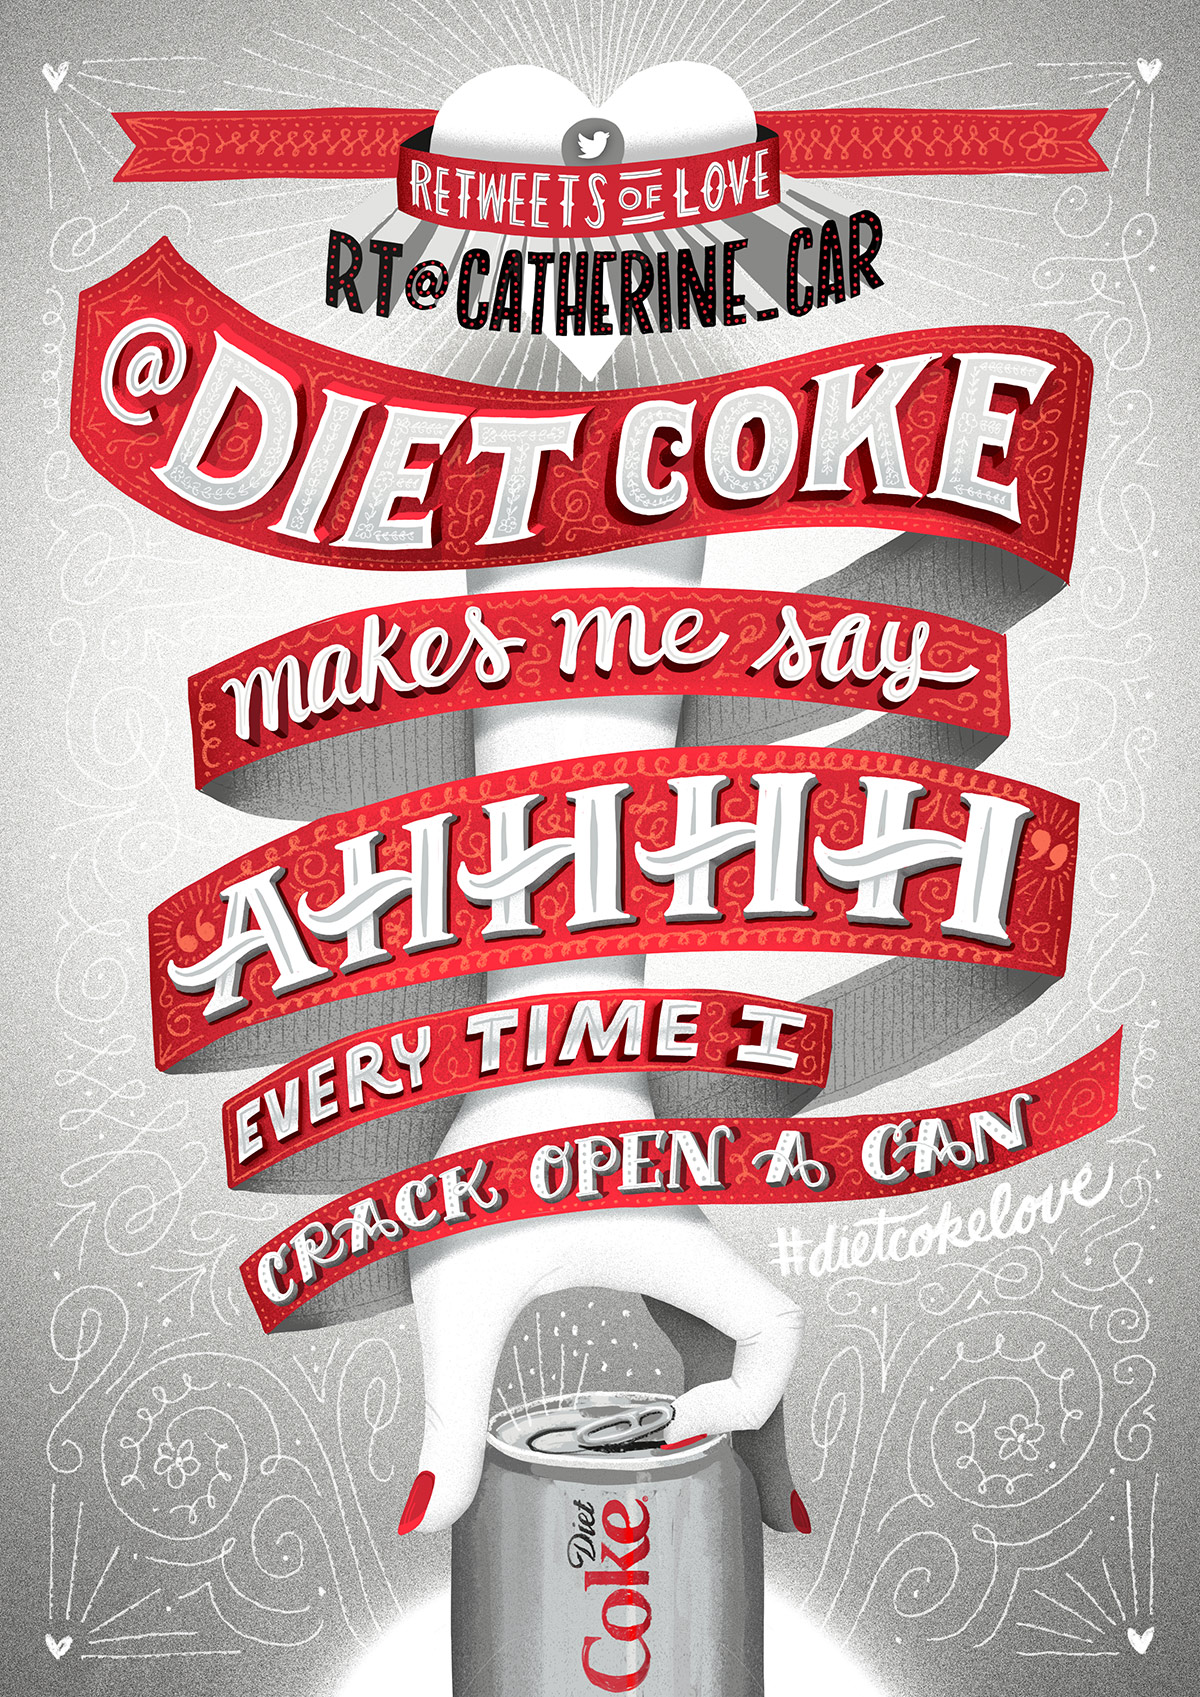 A poster of the diet coke ad.